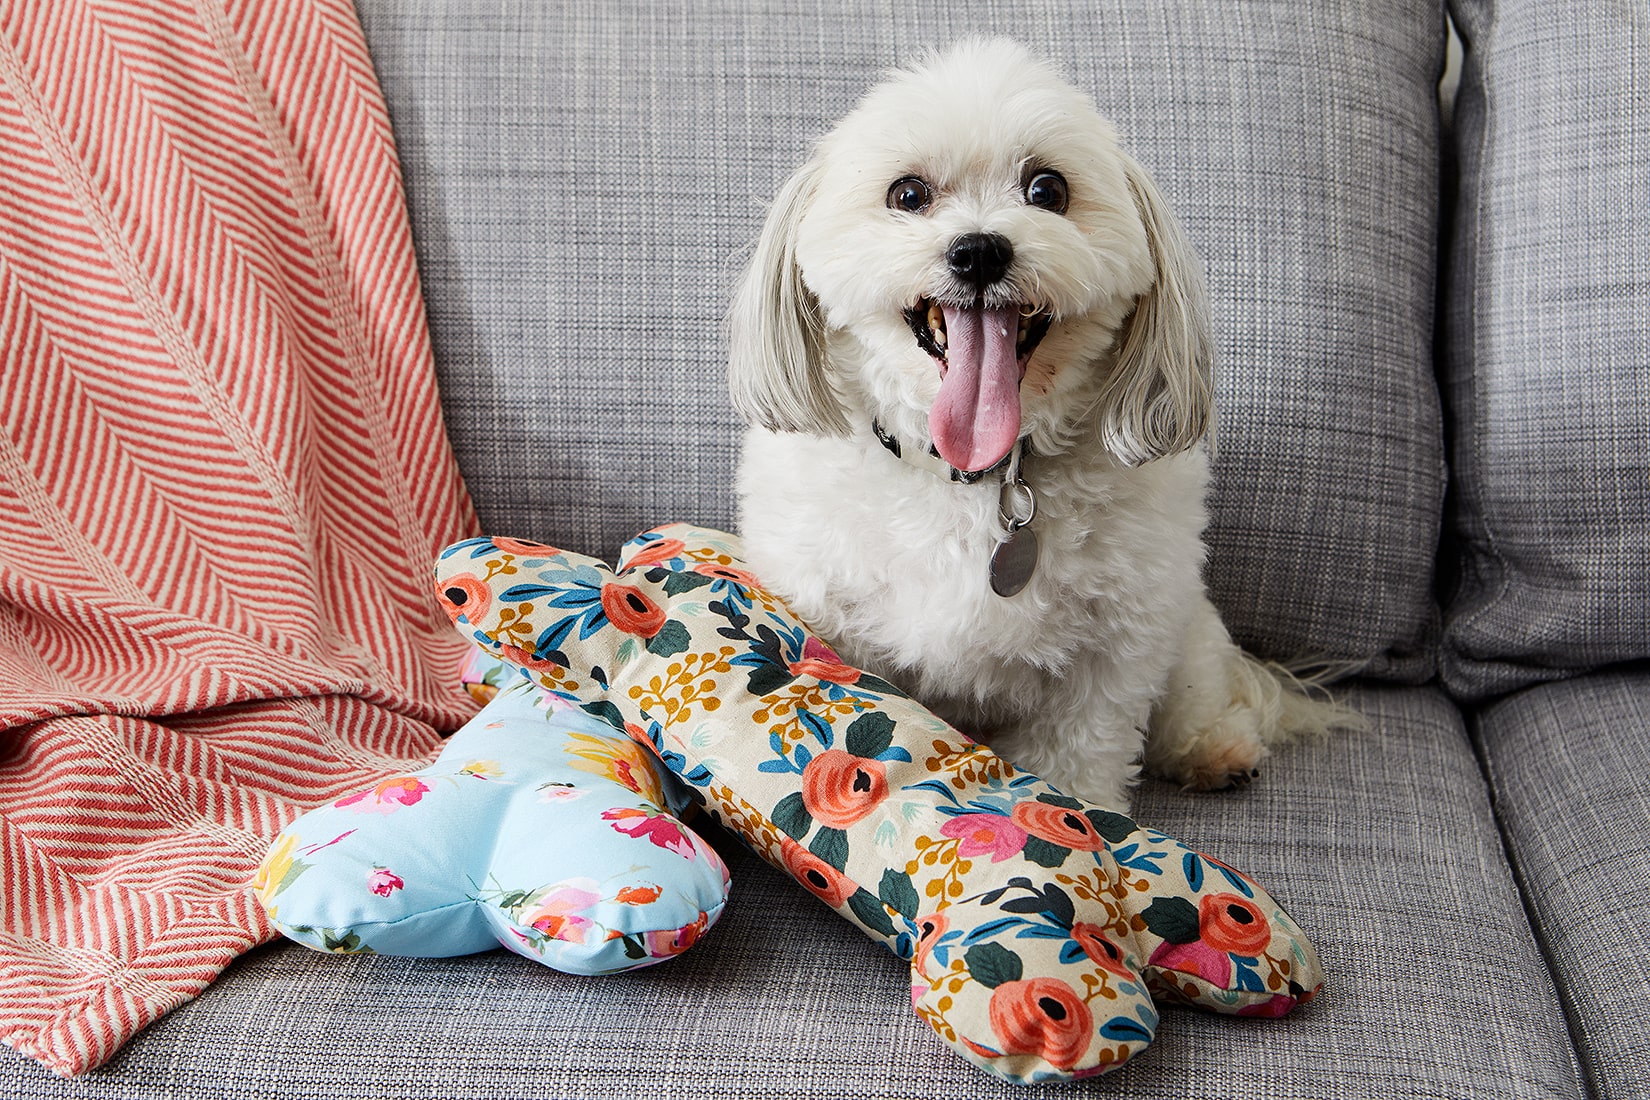 6 super simple DIY dog toys to keep your hound happy - RSPCA South Australia